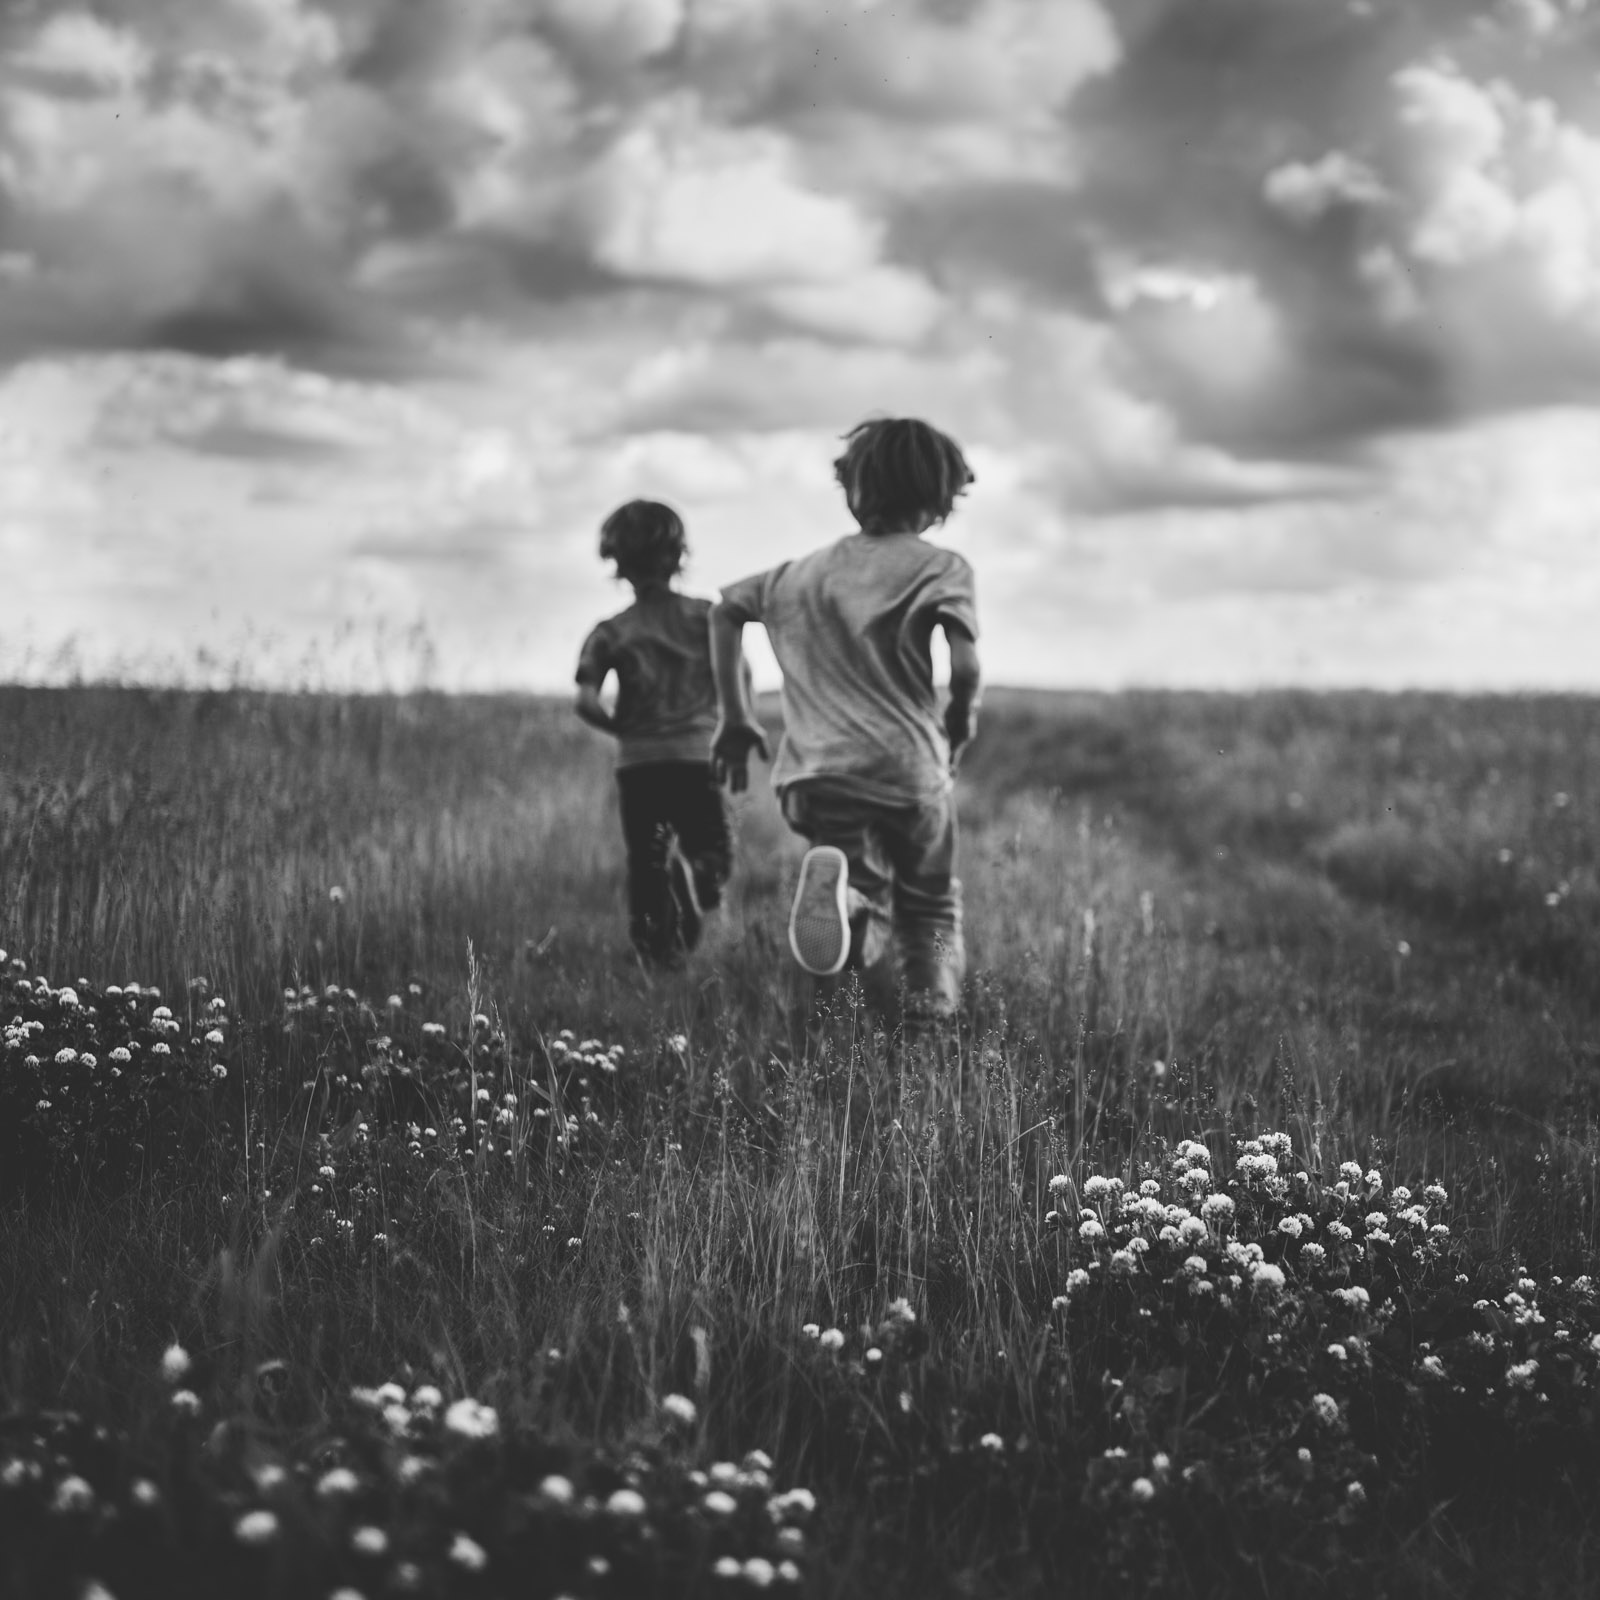 black-and-white-picture-of-boys-running-in-a-field-by-Andrea-Brooke-Photography